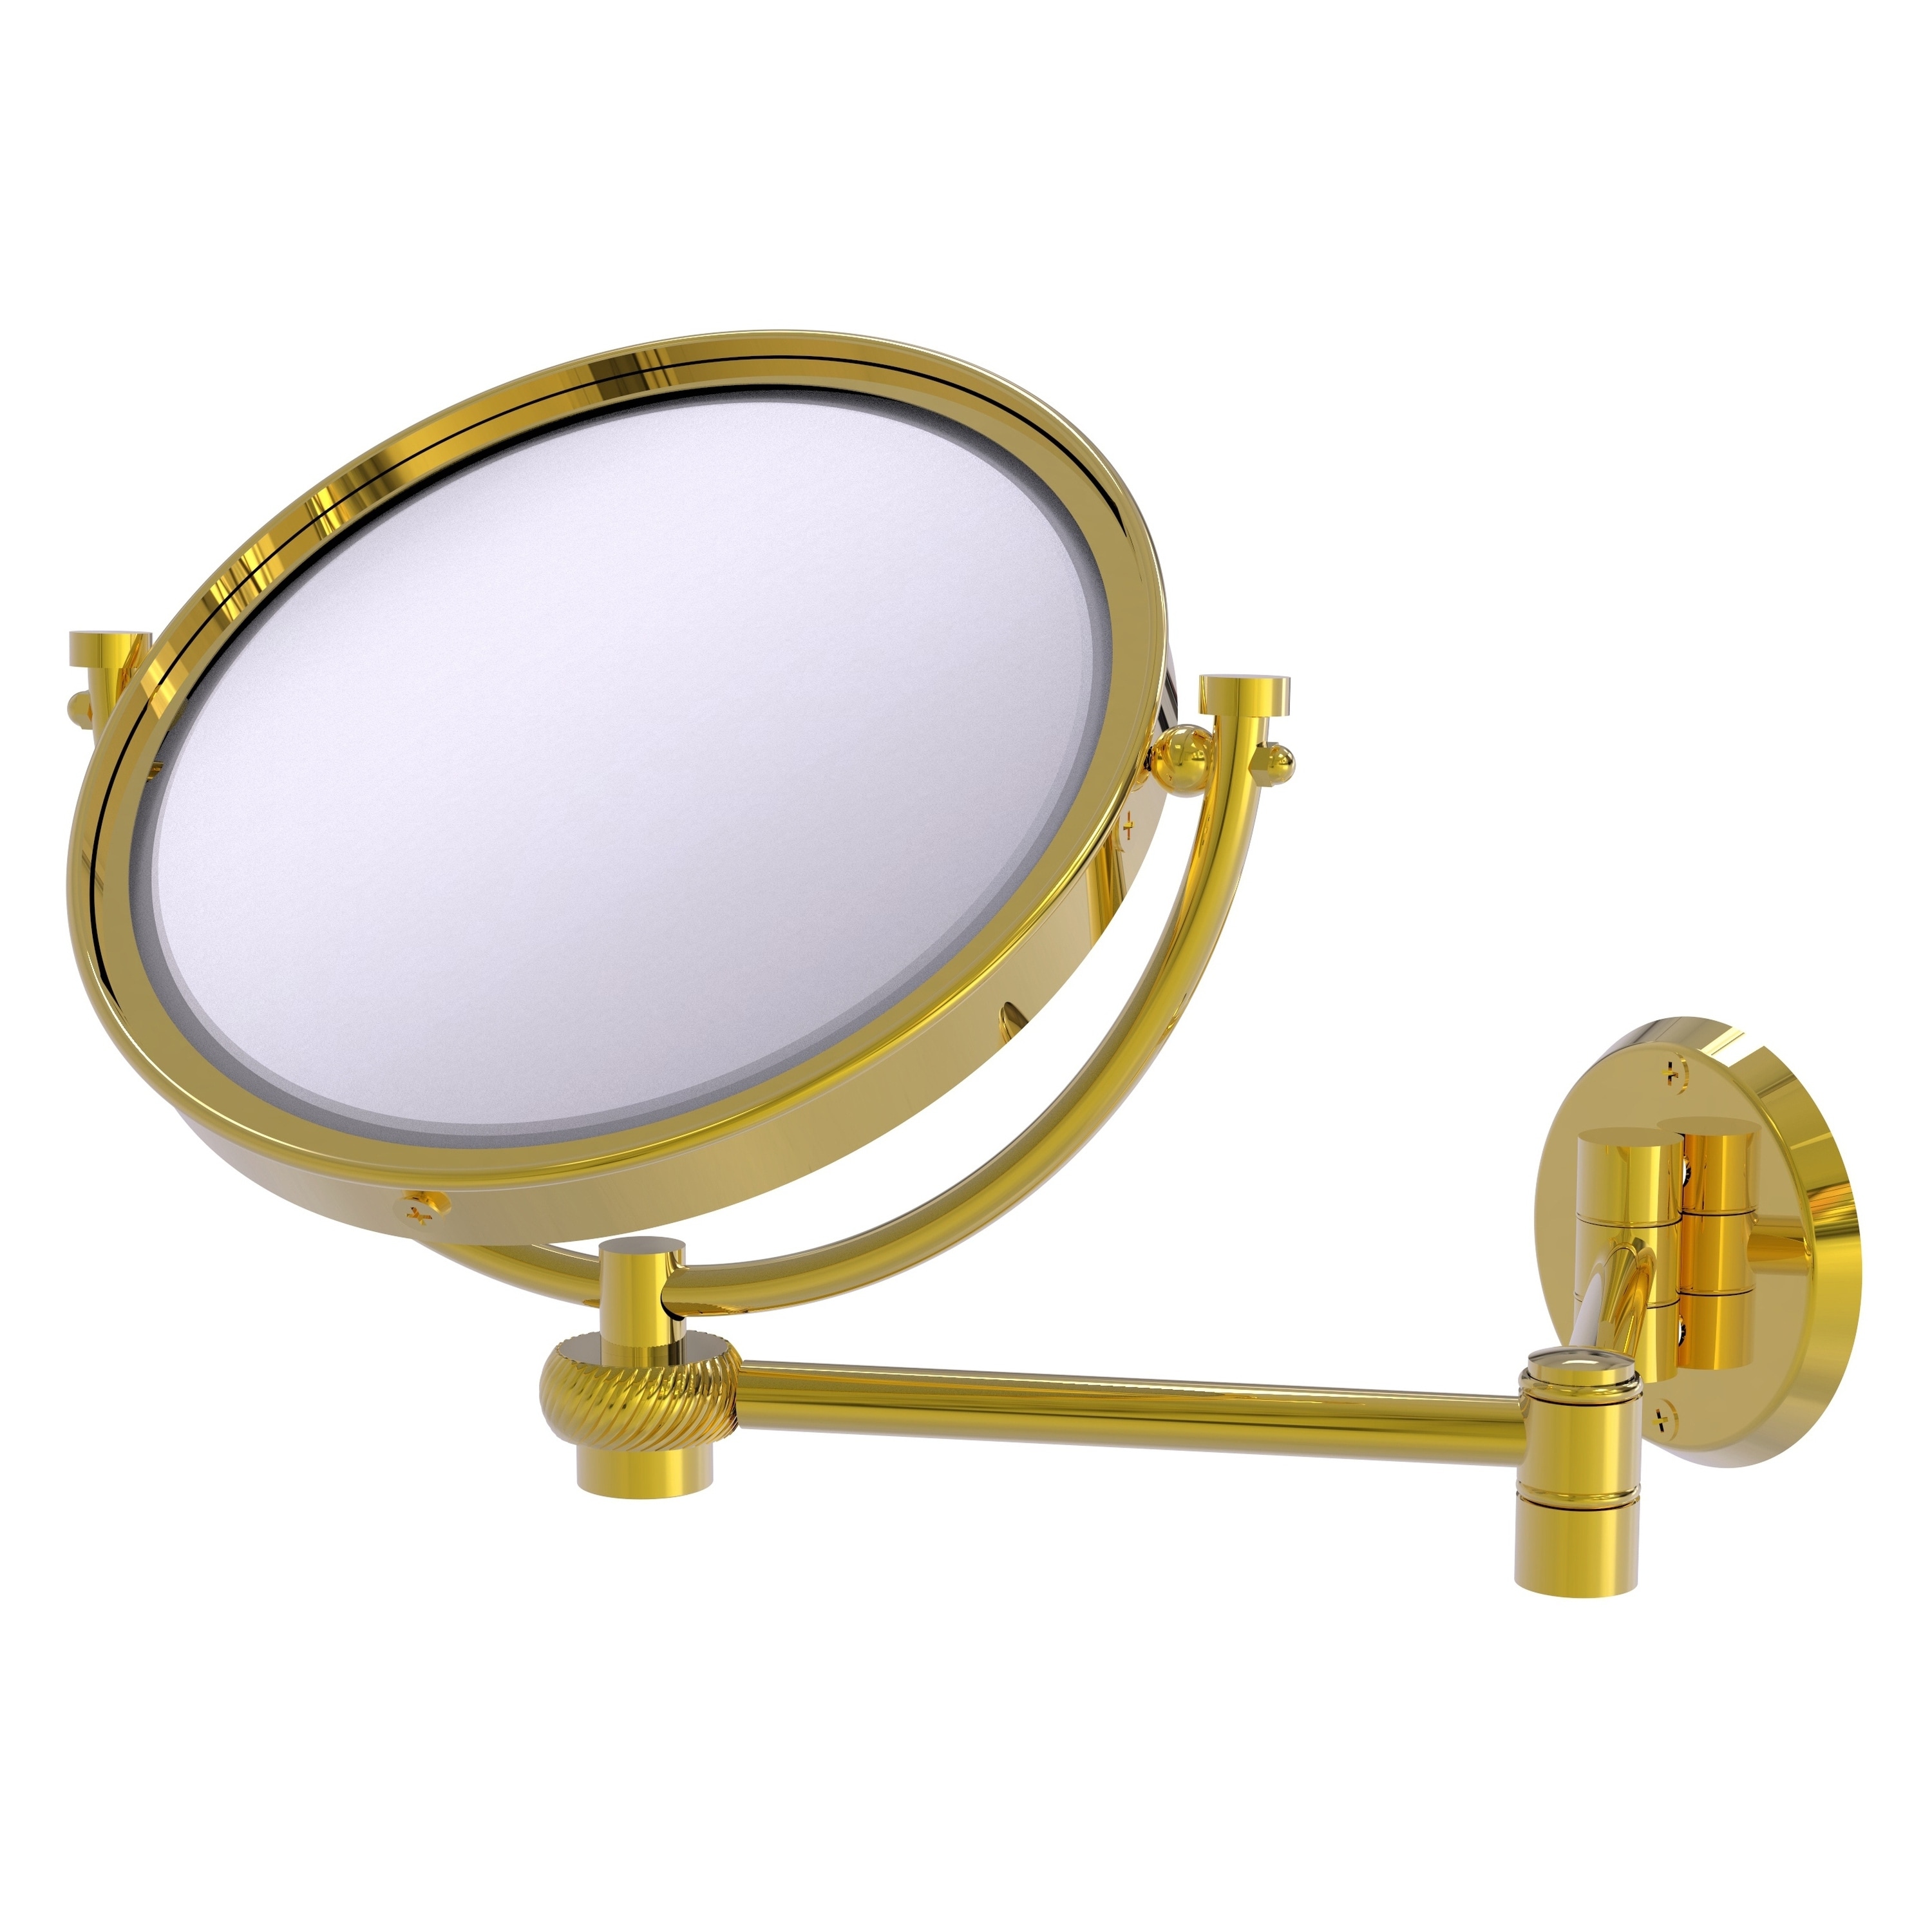 8-in x 10-in Polished Silver Double-sided 3X Magnifying Wall-mounted Vanity Mirror | - Allied Brass WM-6T/3X-PB